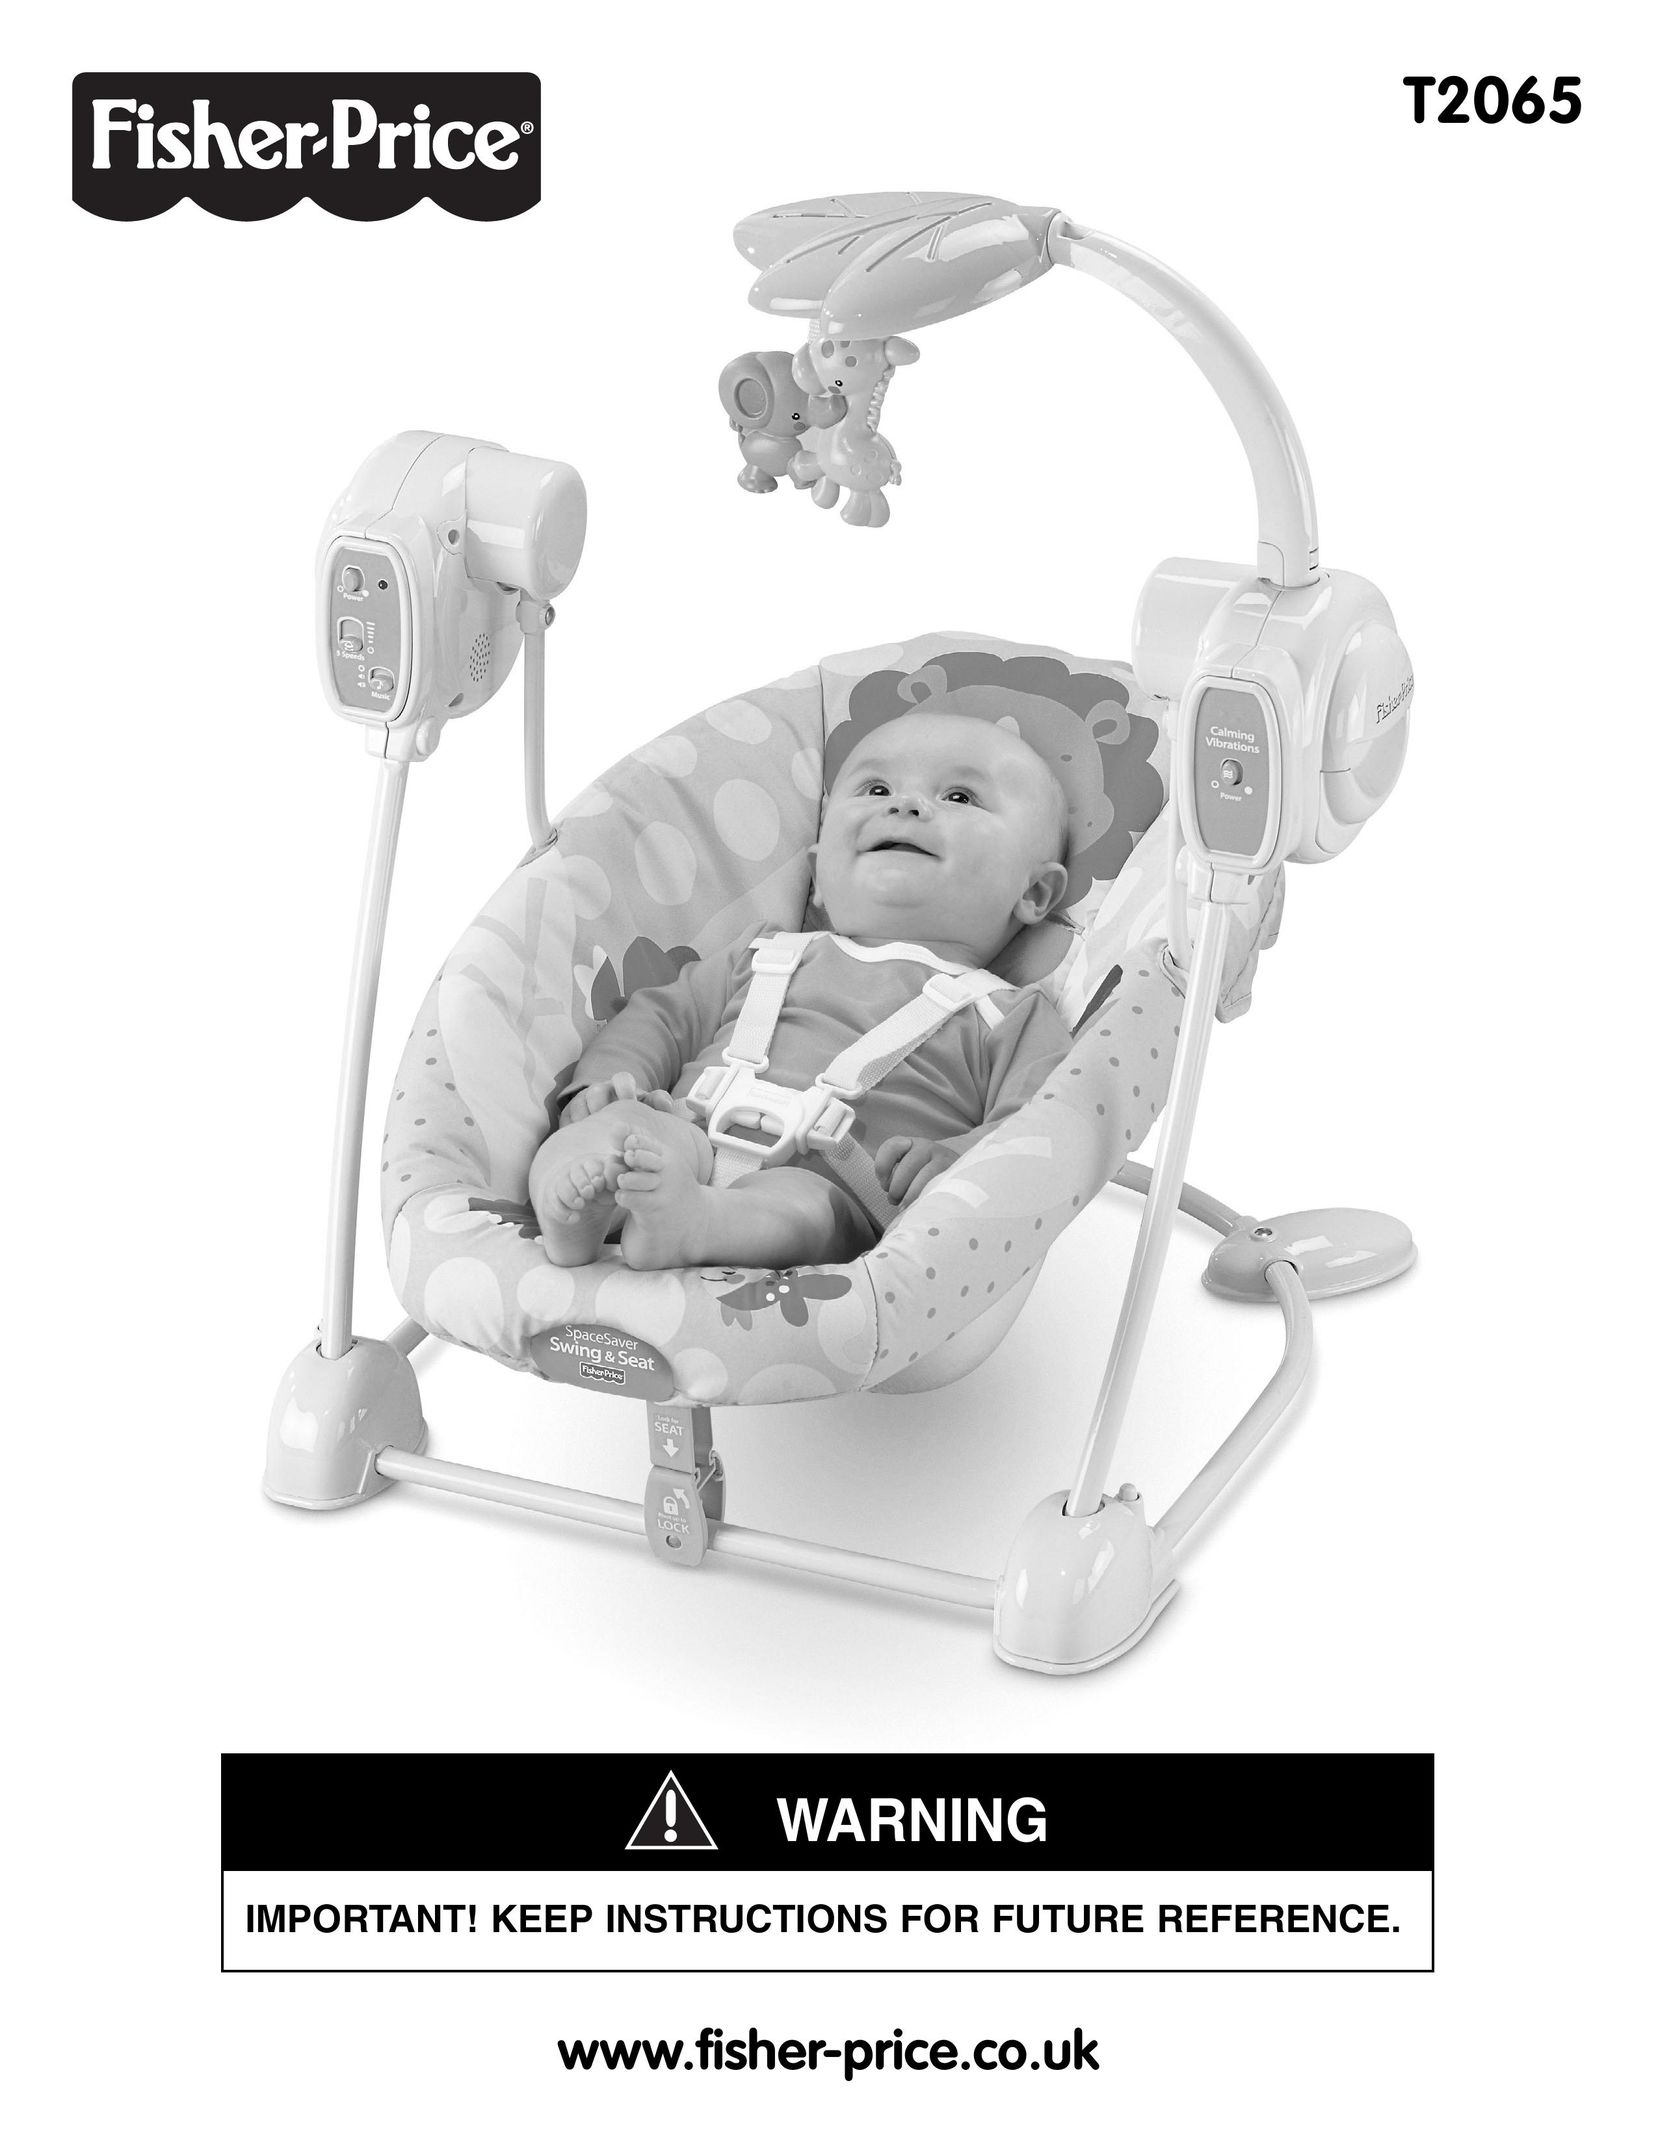 Fisher-Price T2065 Baby Swing User Manual